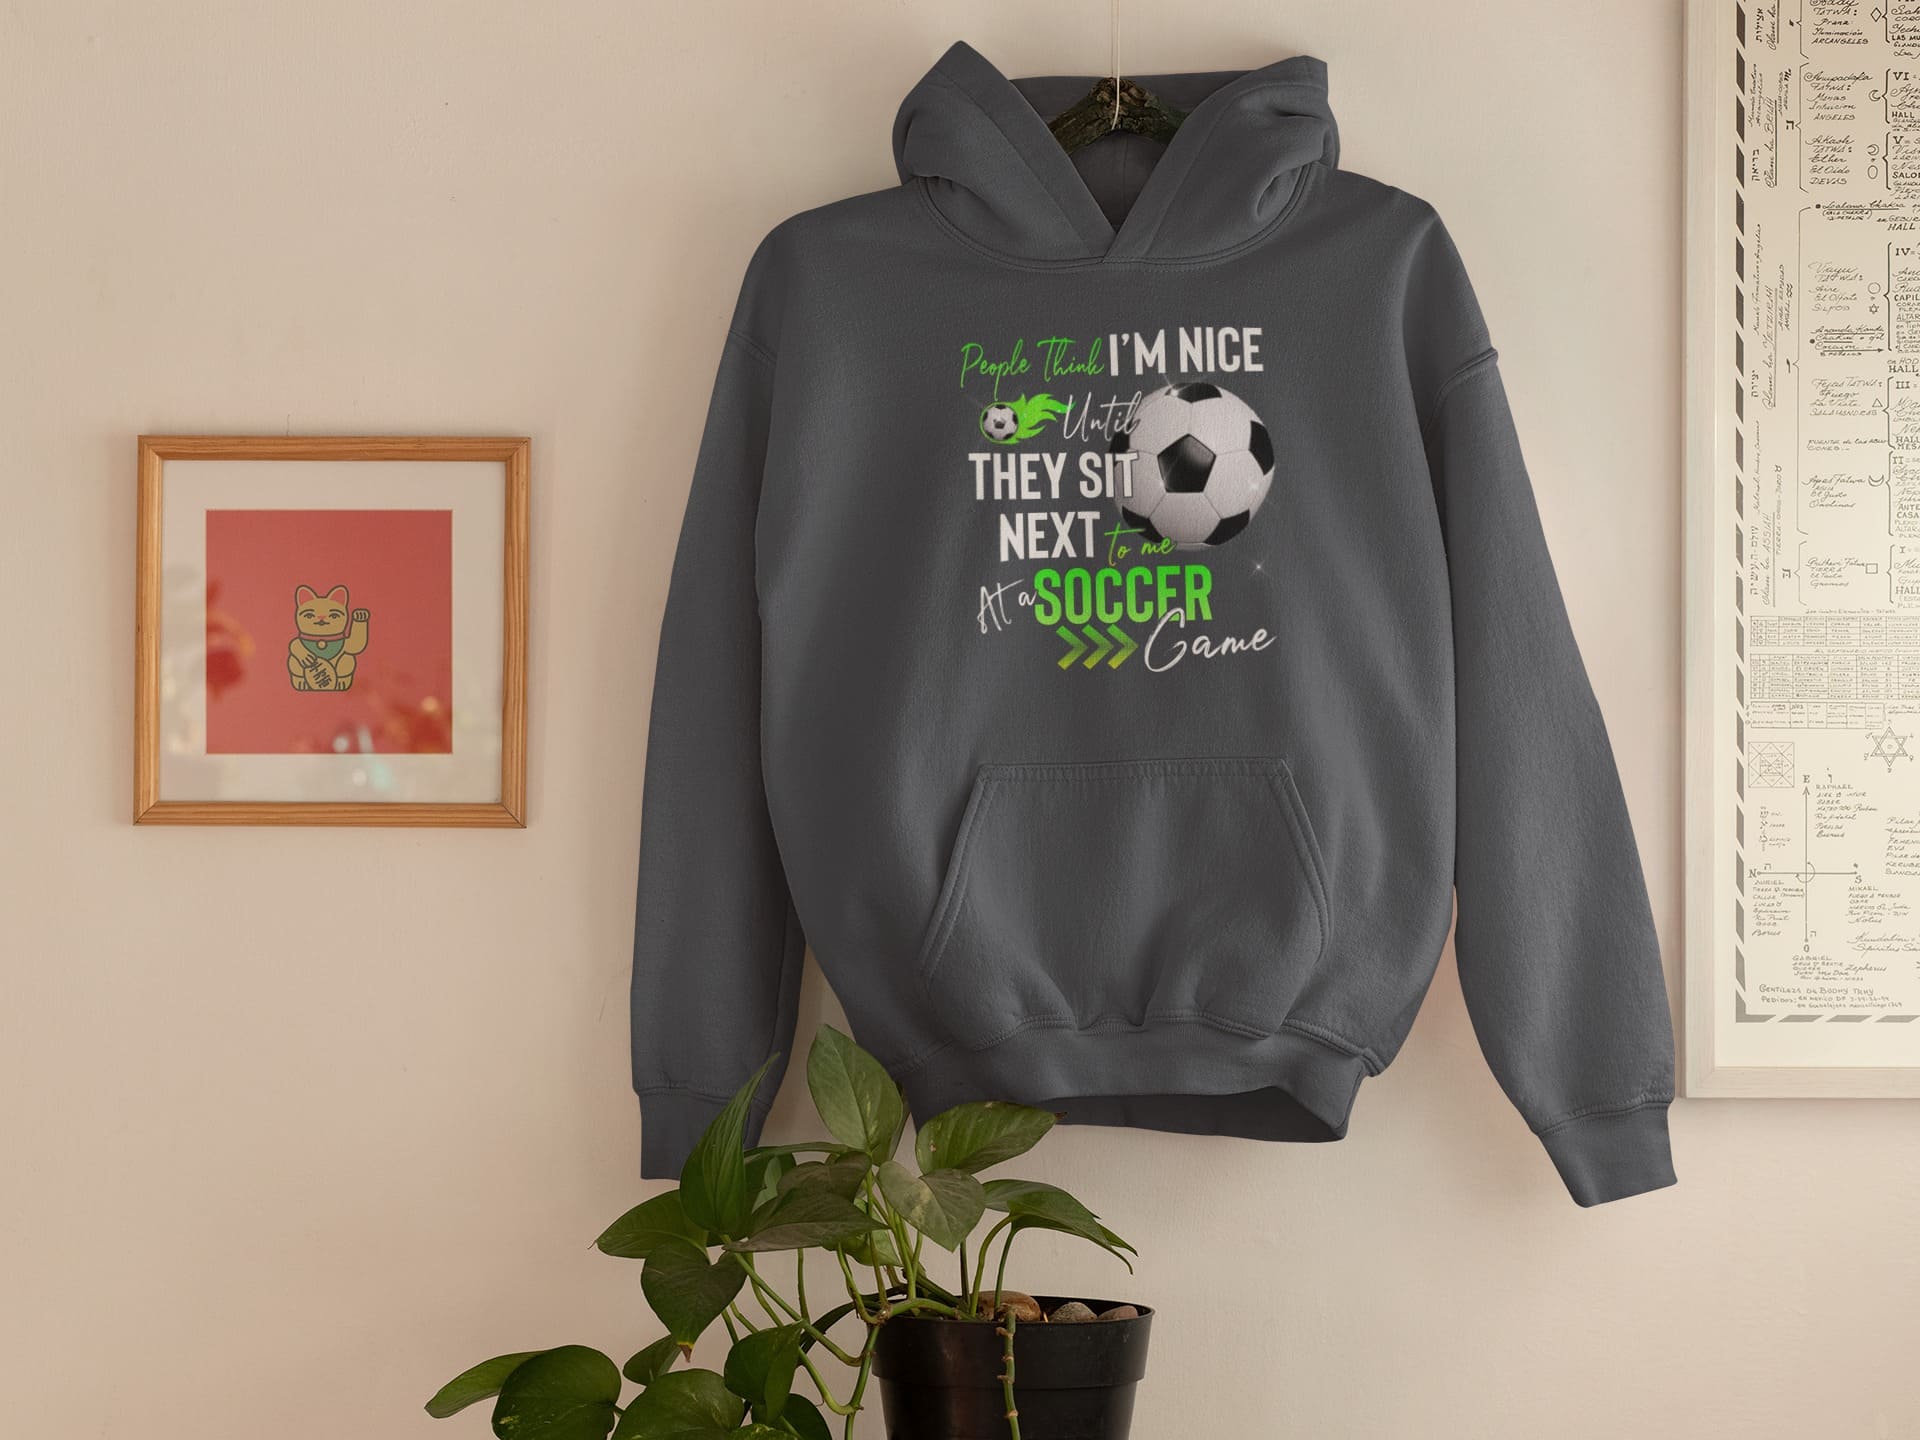 People think I'm nice until they site next to me at a soccer game - Gift for soccer player, toxic soccer player